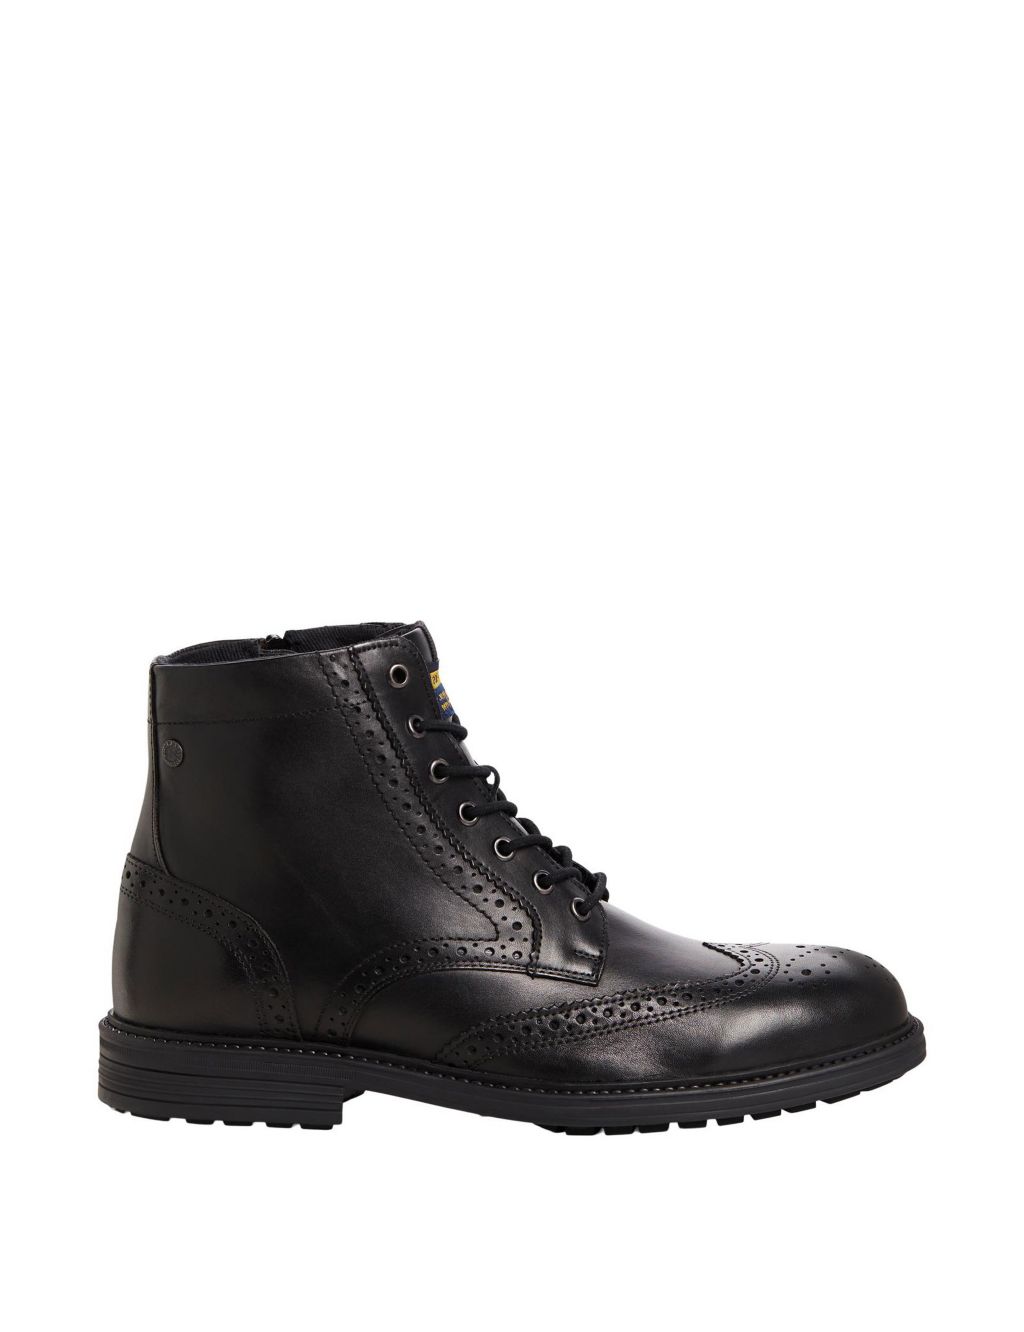 Leather Brogue Casual Boots image 1